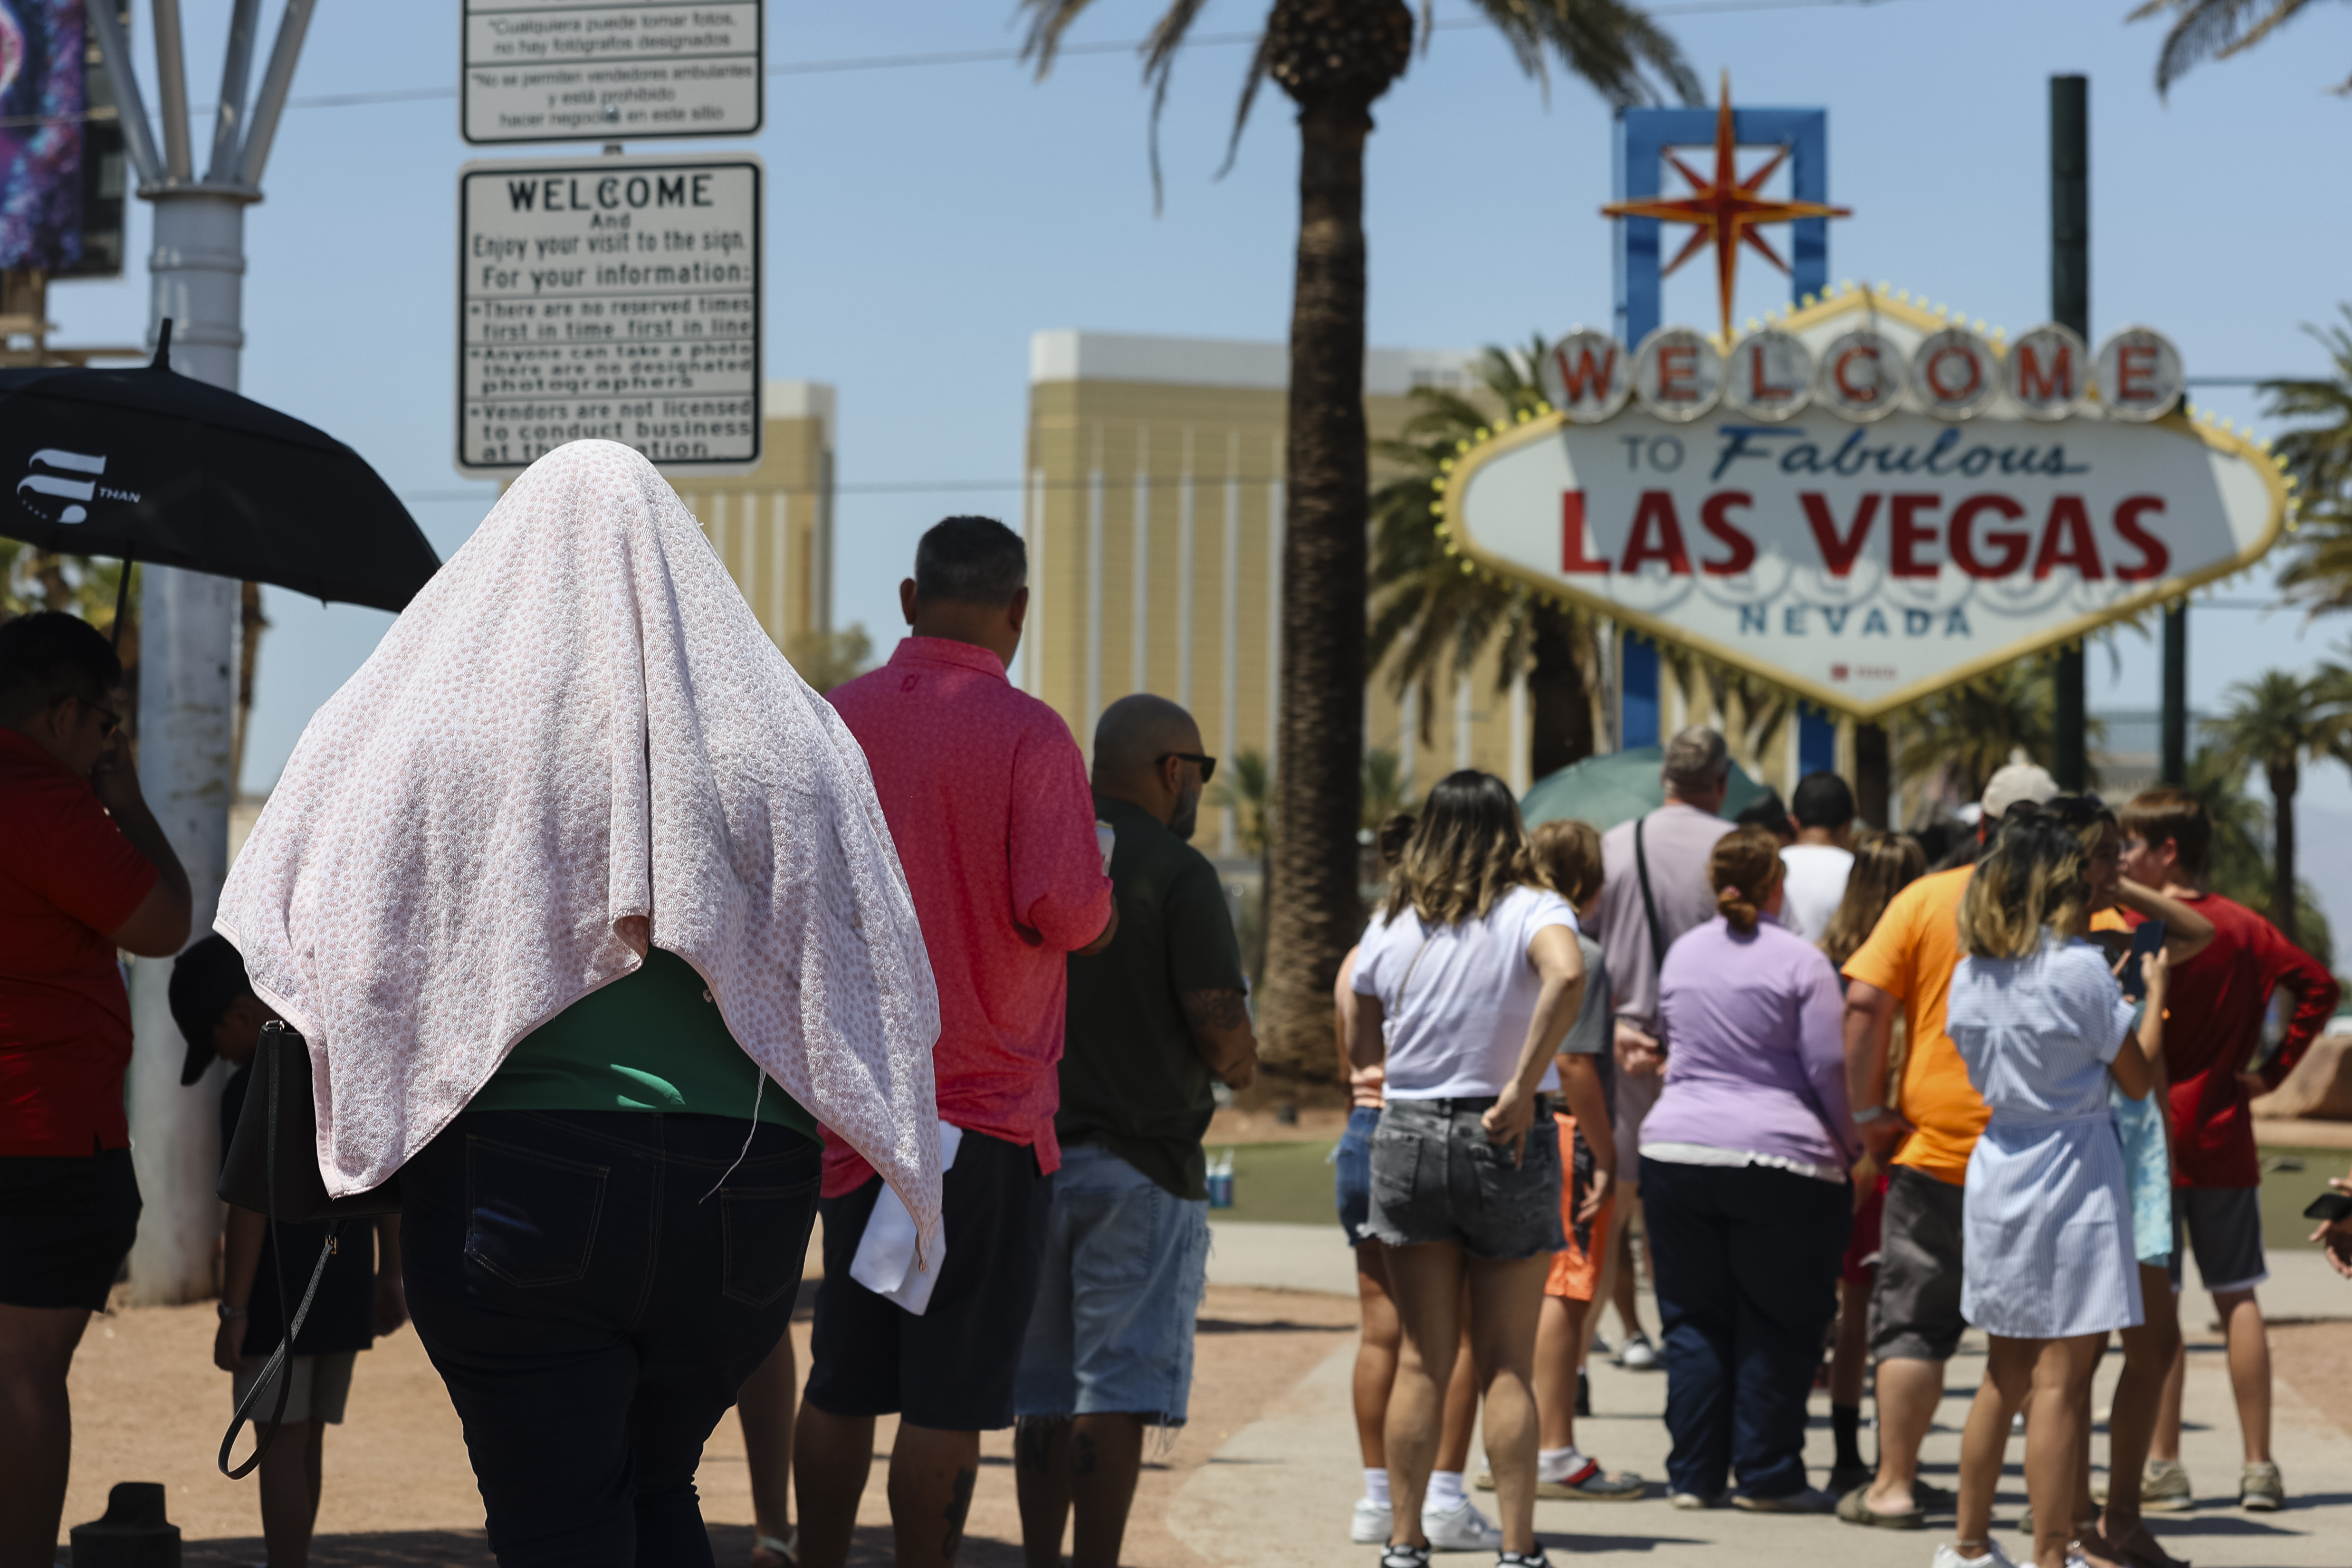 A person uses a blanket to block the sun while waiting to take a photo at the "Welcome to Las Vegas" sign Monday, July 8, 2024, in Las Vegas. After causing deaths and shattering records in the West over the weekend, a long-running heat wave will again grip the U.S. on Monday, with hot temperatures also predicted for large parts of the East Coast and the South. (Wade Vandervort/Las Vegas Sun via AP)